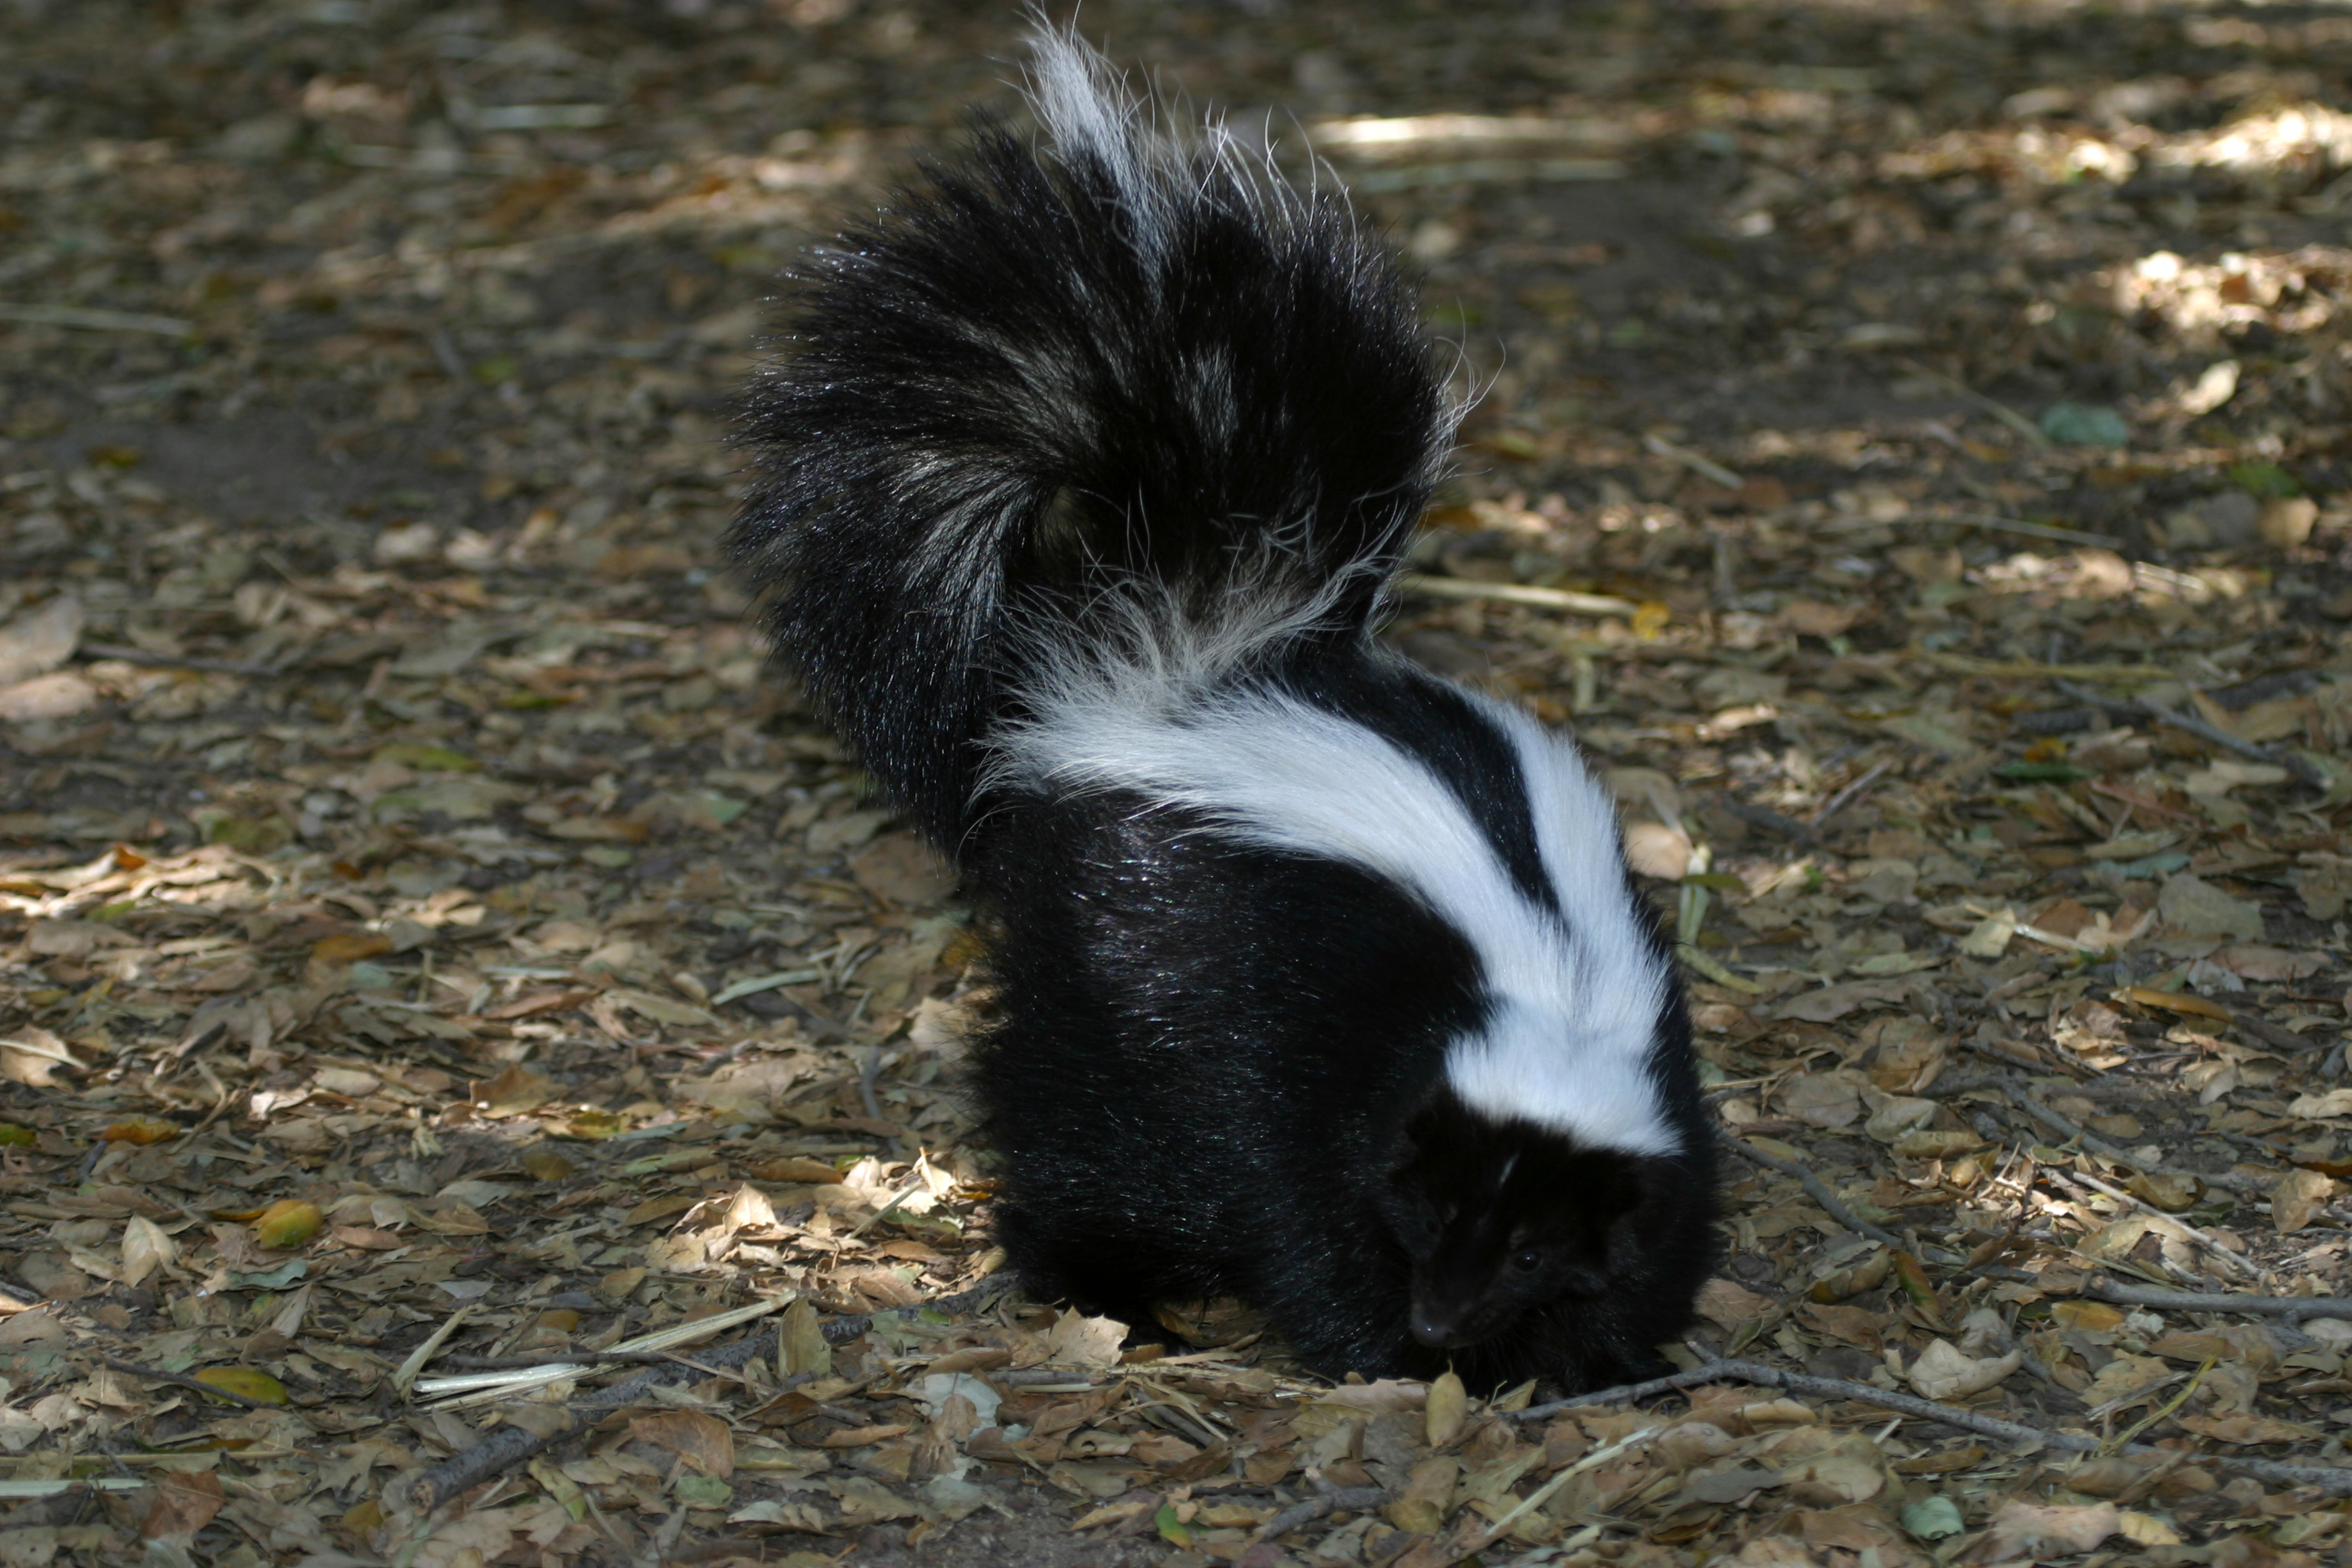 Can you touch baby skunks?